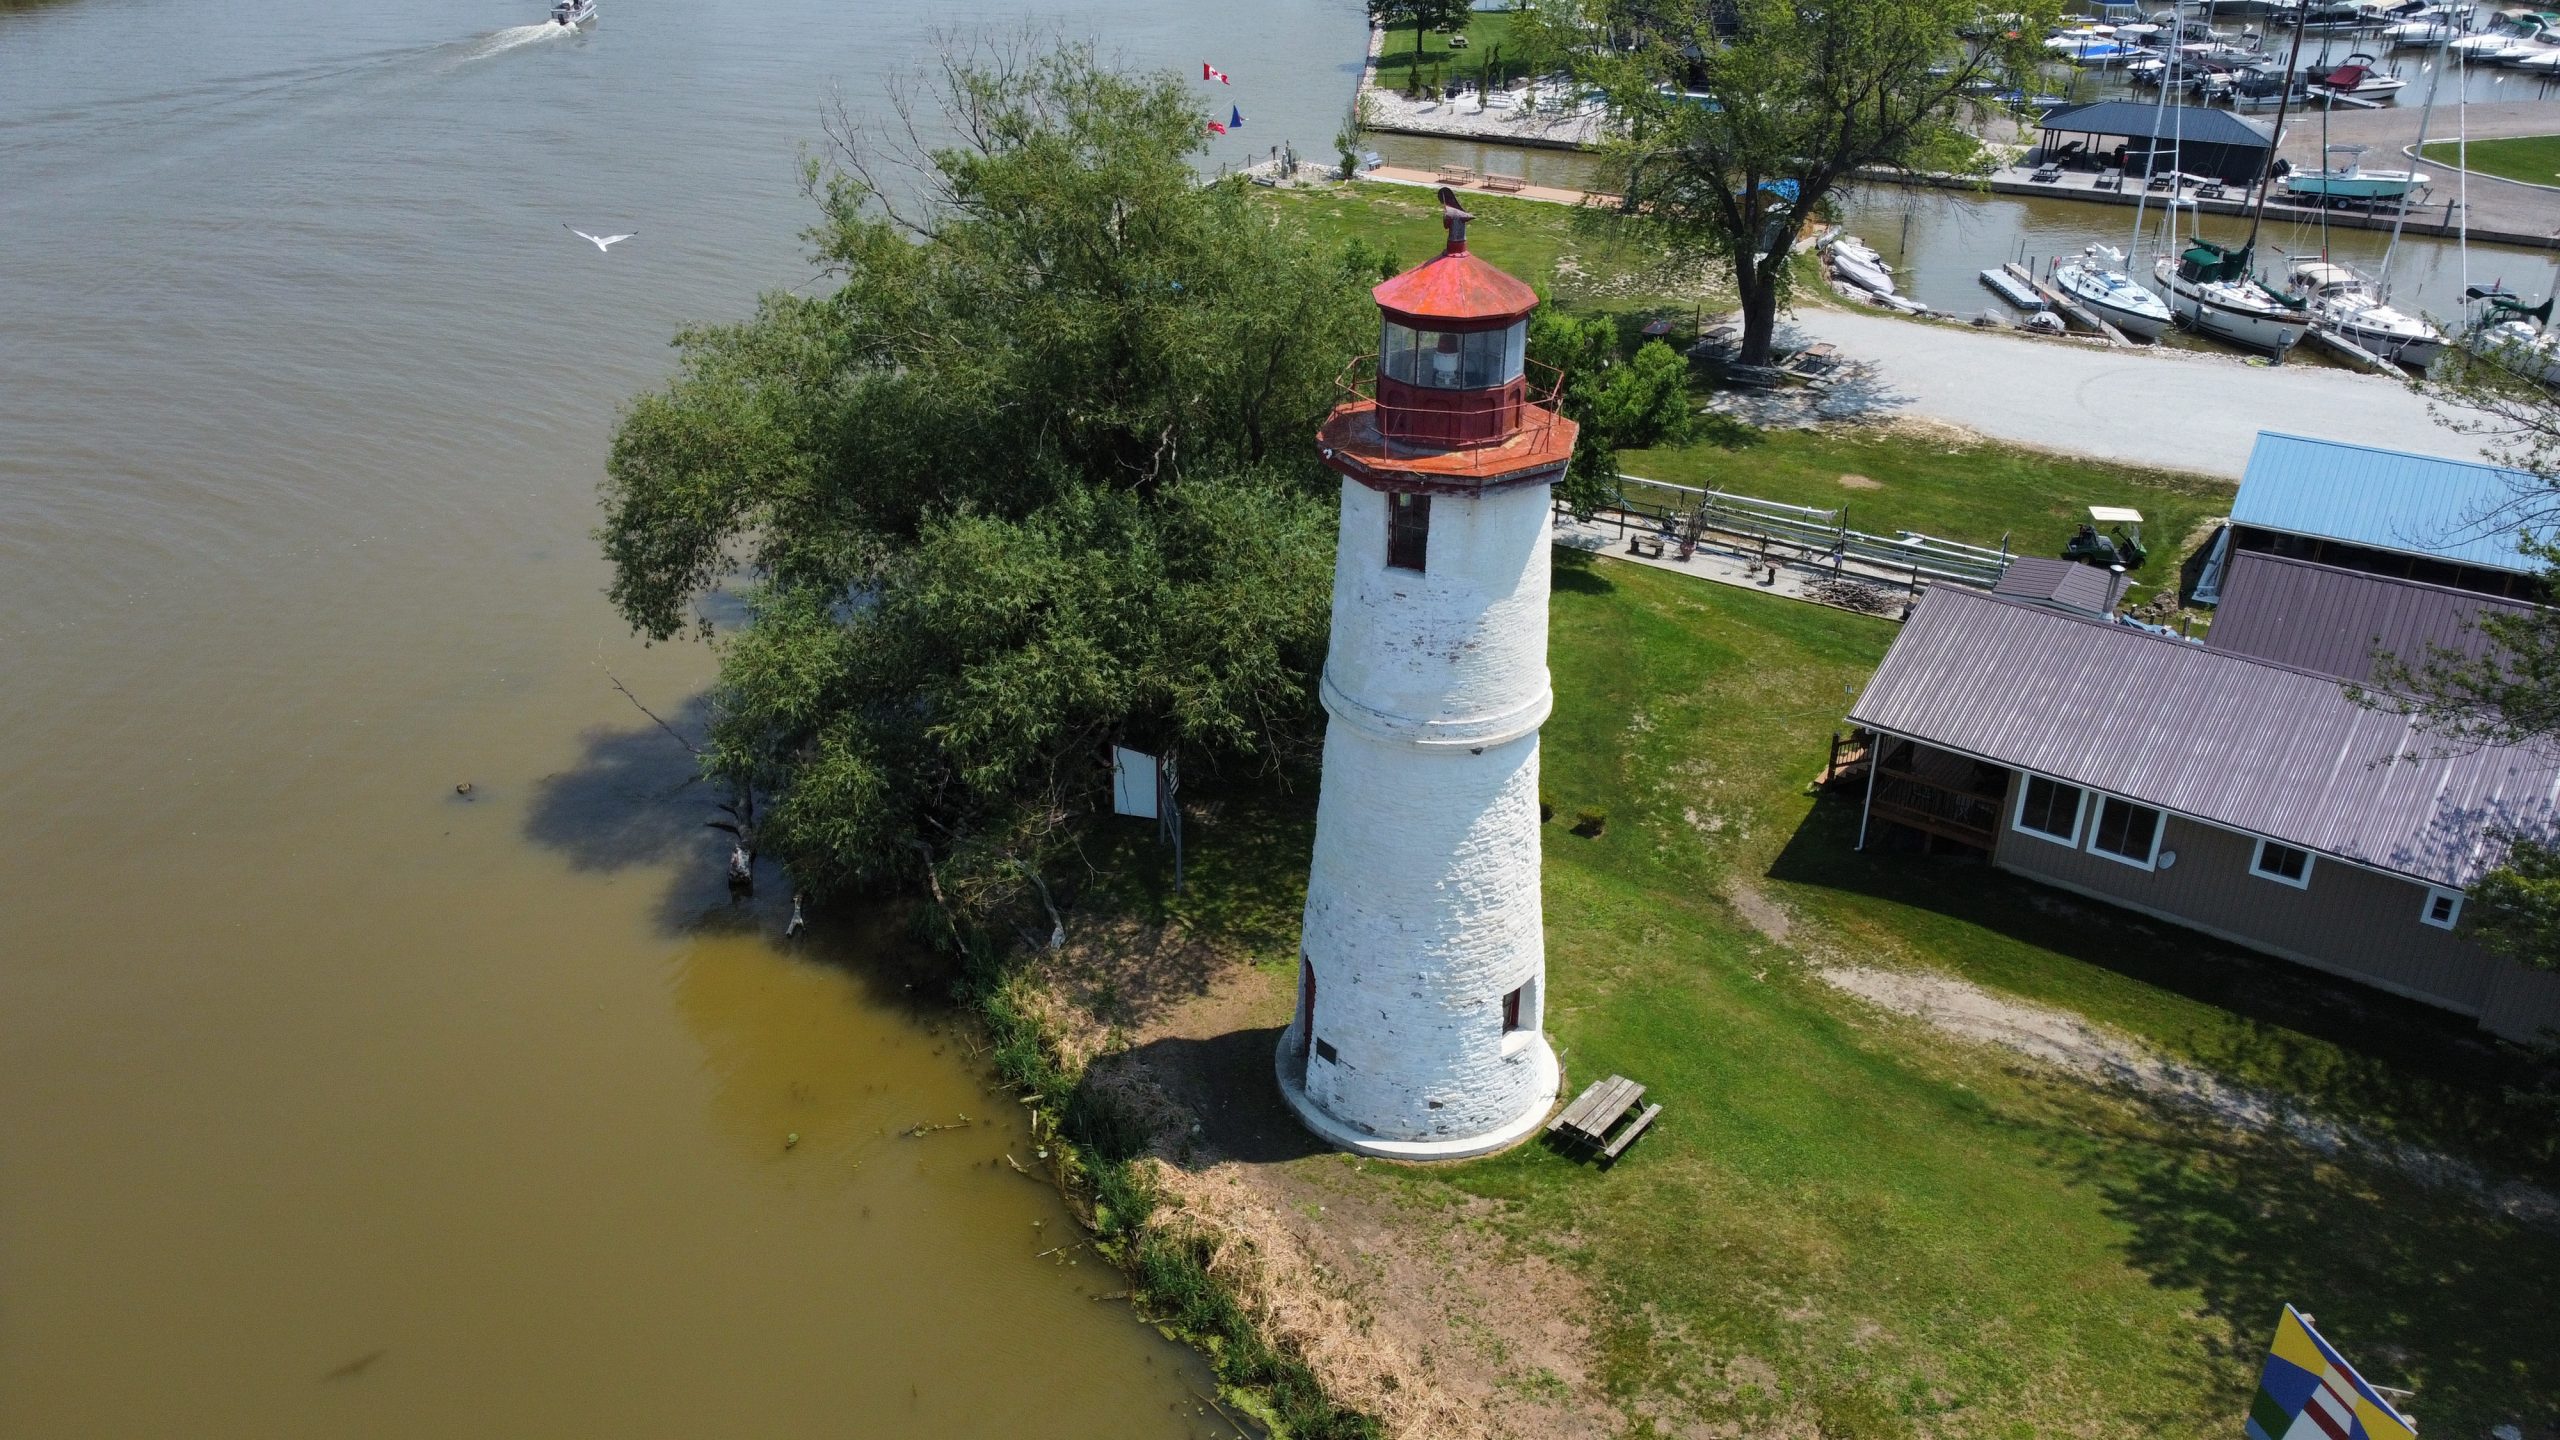 Lighthouse Conservation Area